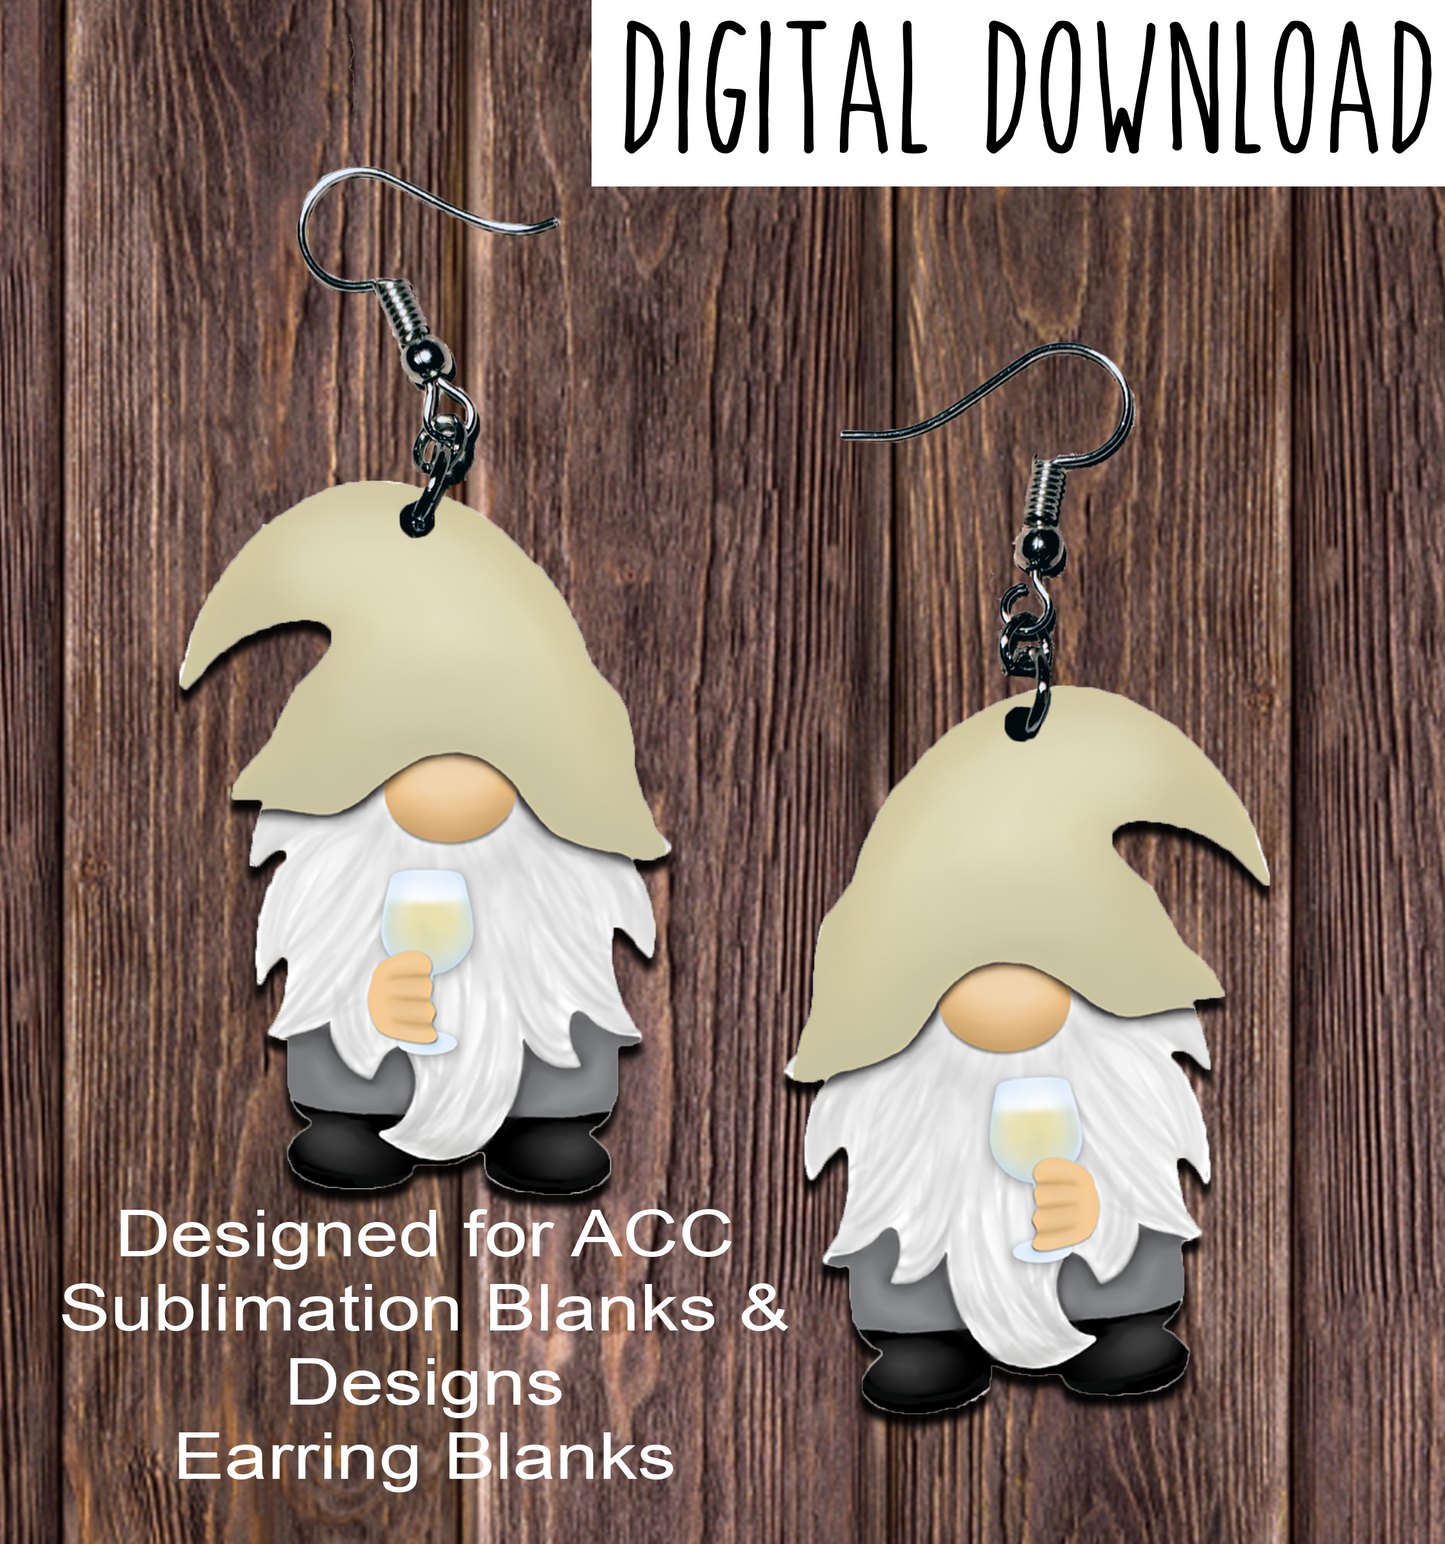 White Wine Gnome Earring Sublimation Design, Hand drawn Gnome Sublimation earring design, digital download, JPG, PNG